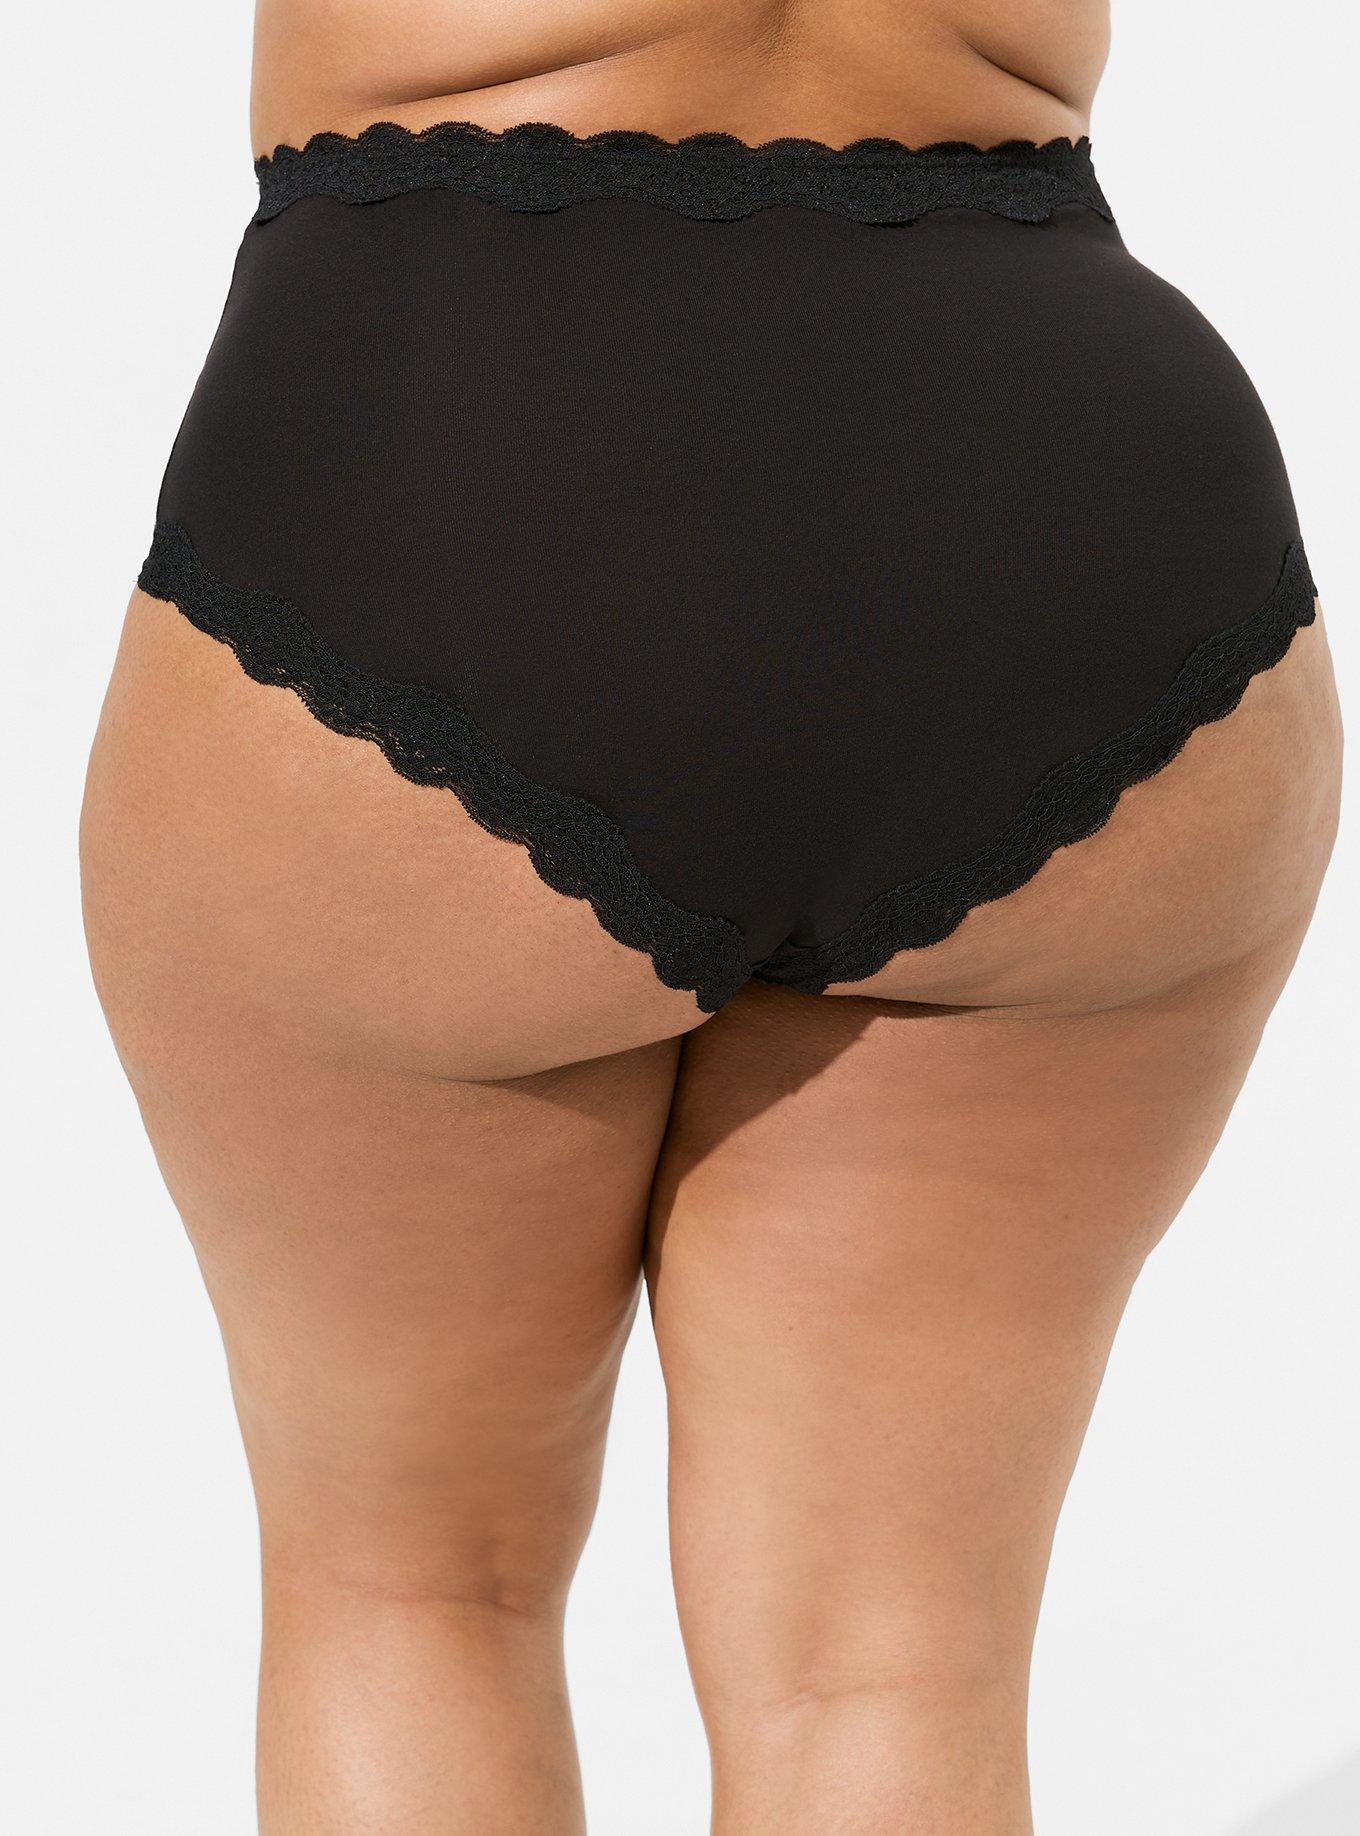 Torrid Cheeky Panties Underwear 2 pair Cotton Wide Lace waistband Plus Size  2